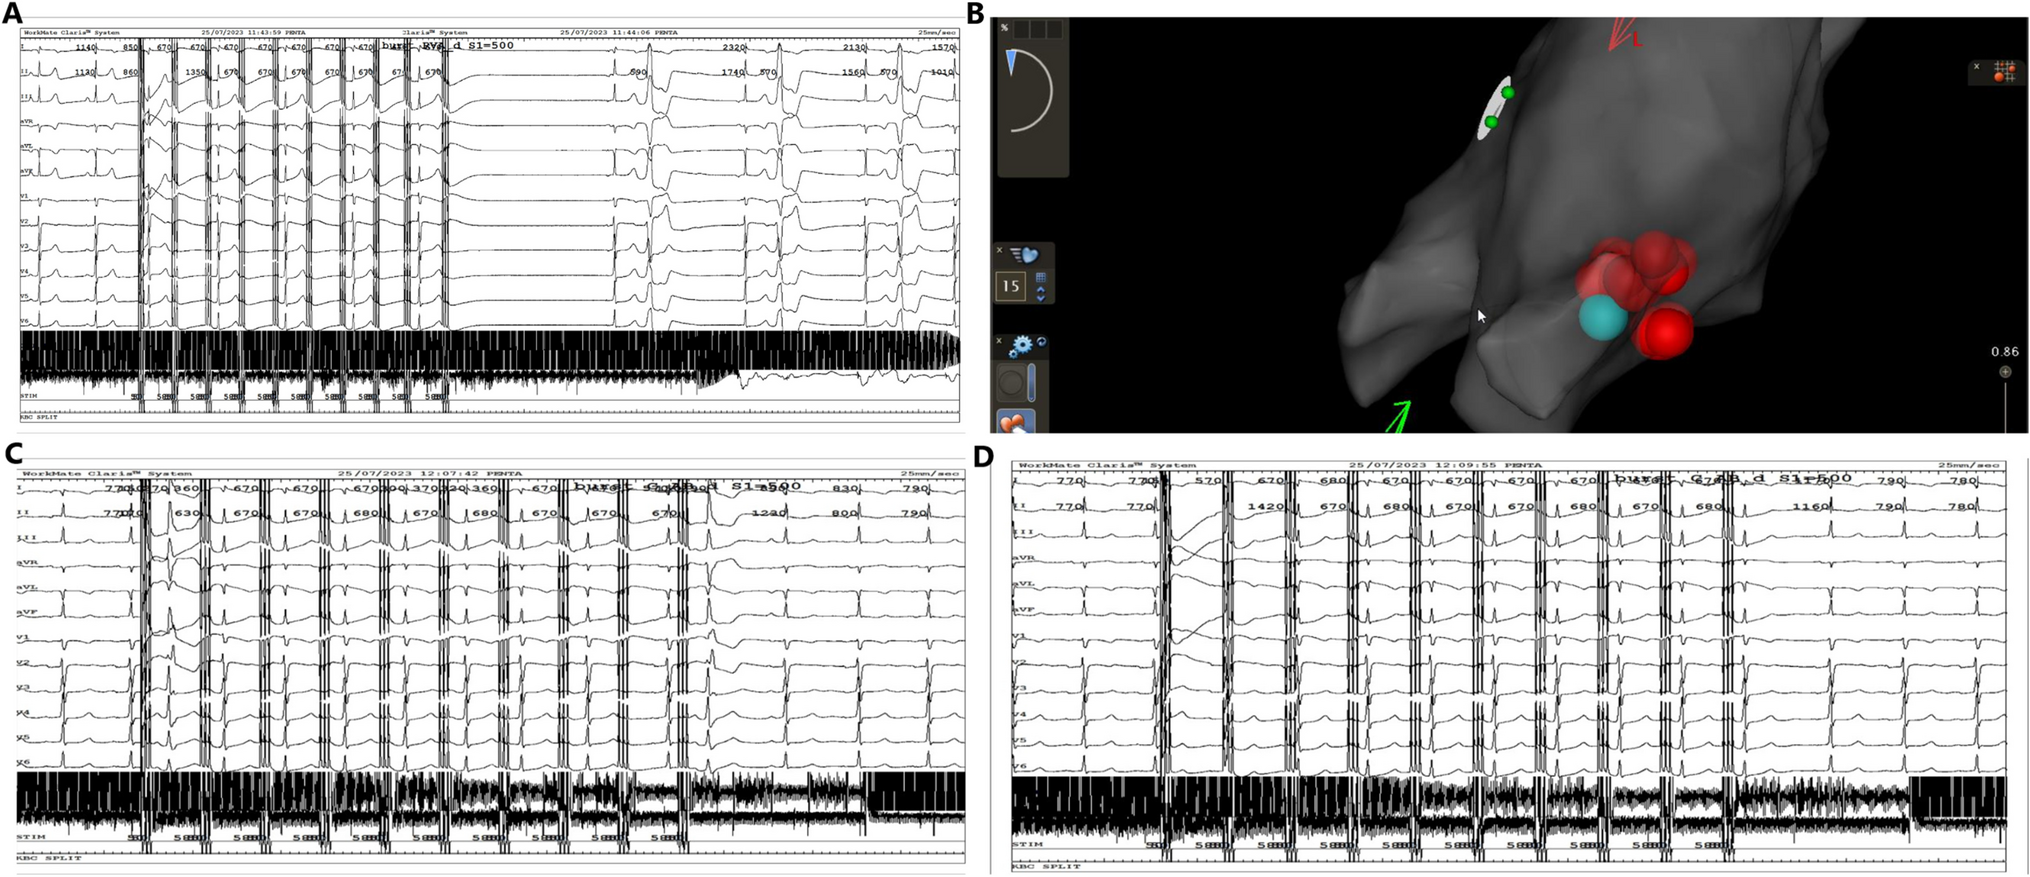 Focal pulsed field ablation for guiding and assessing the acute effect of cardioneuroablation